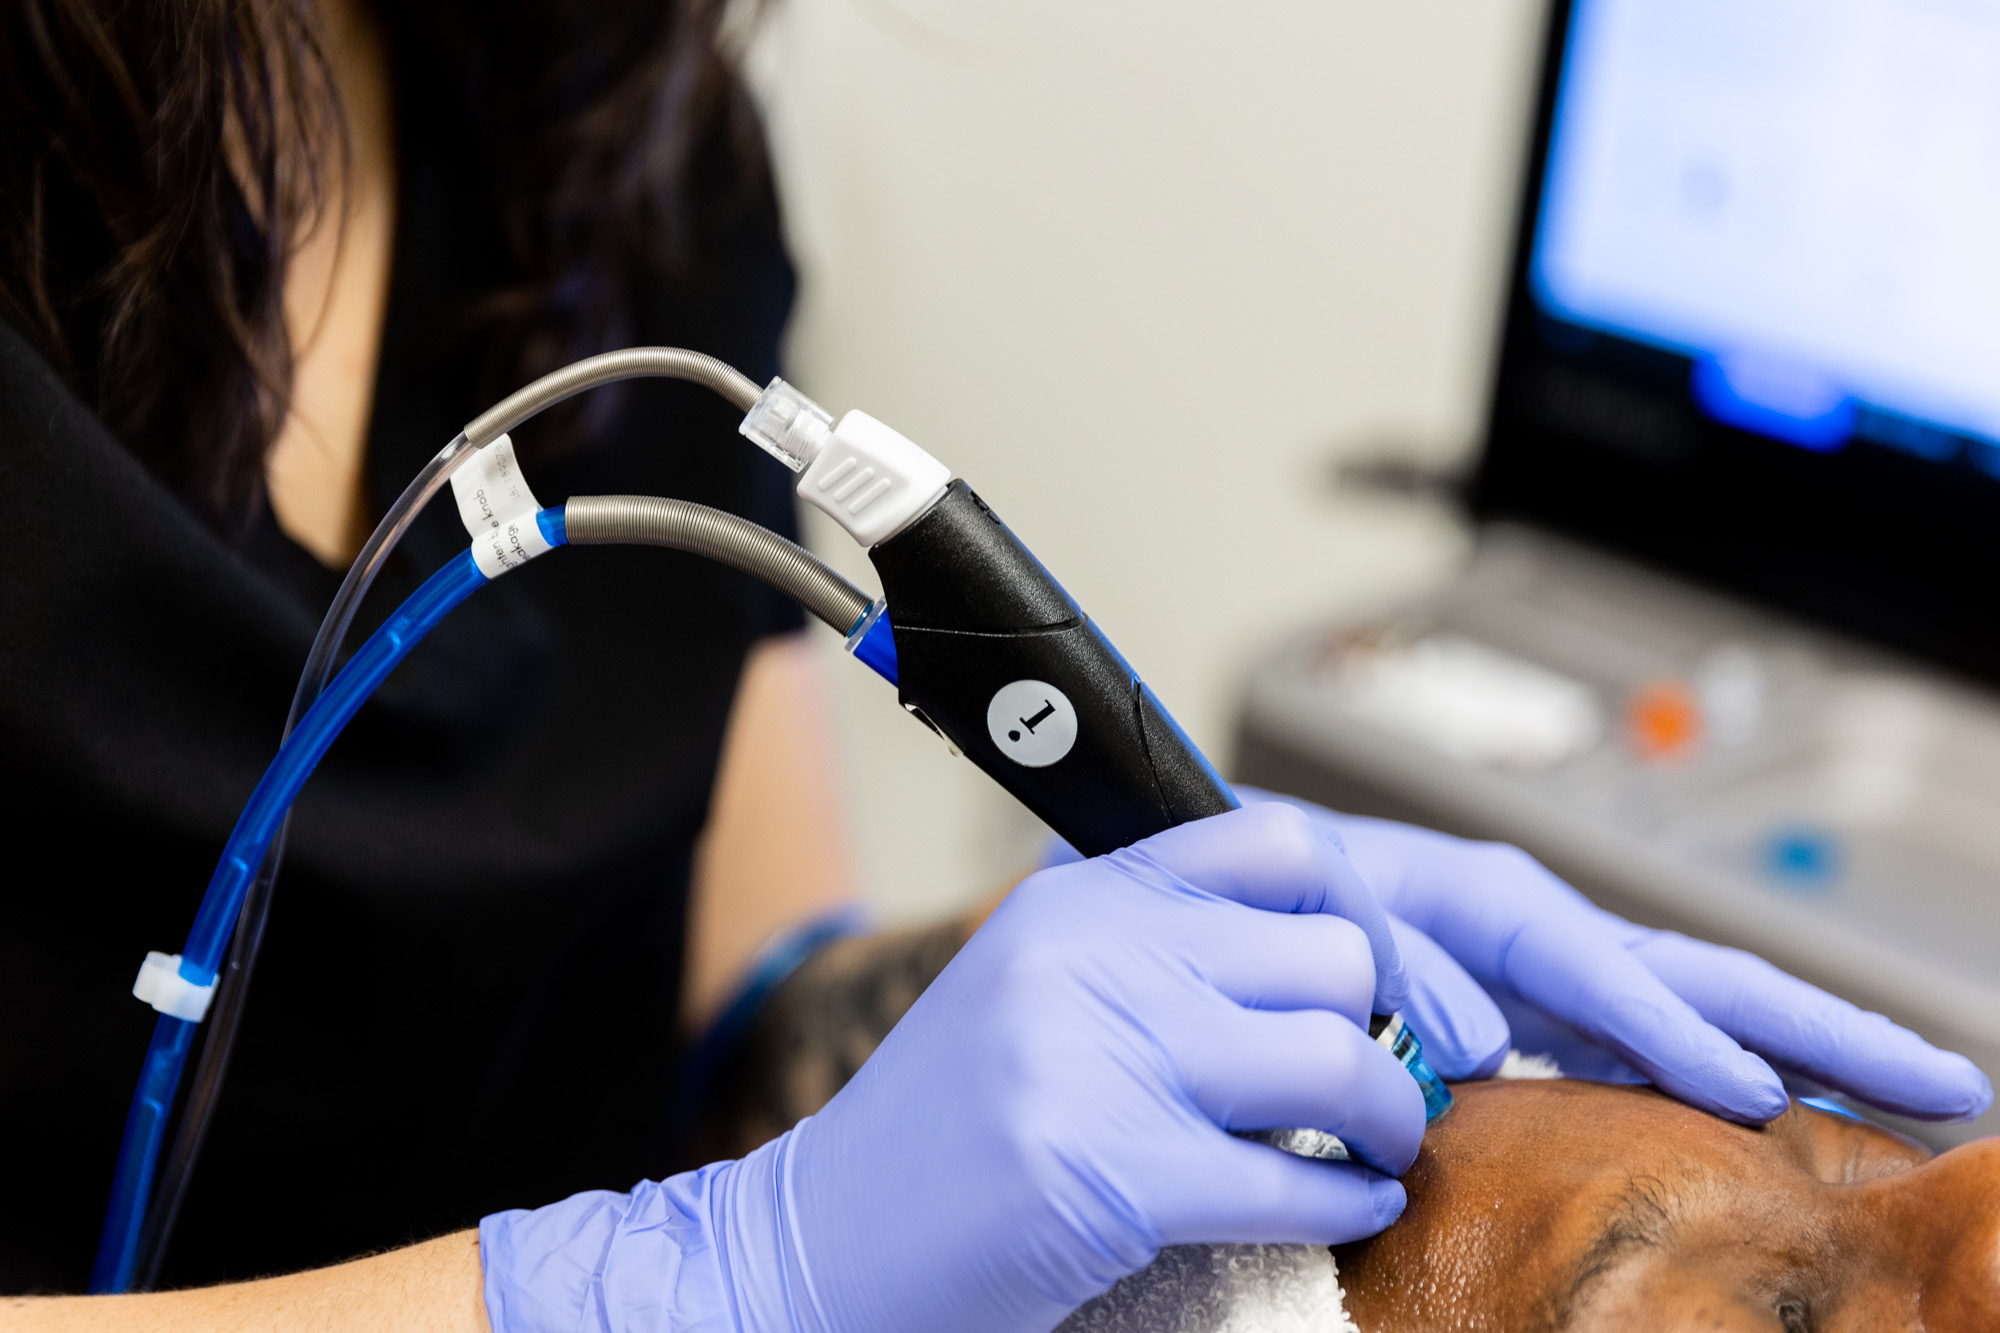 Close up of a client receiving a hydrafacial. In the image is the hydrafacial handheld application device and the hands of the medical professional administering the treatment, as well as the client's forehead.